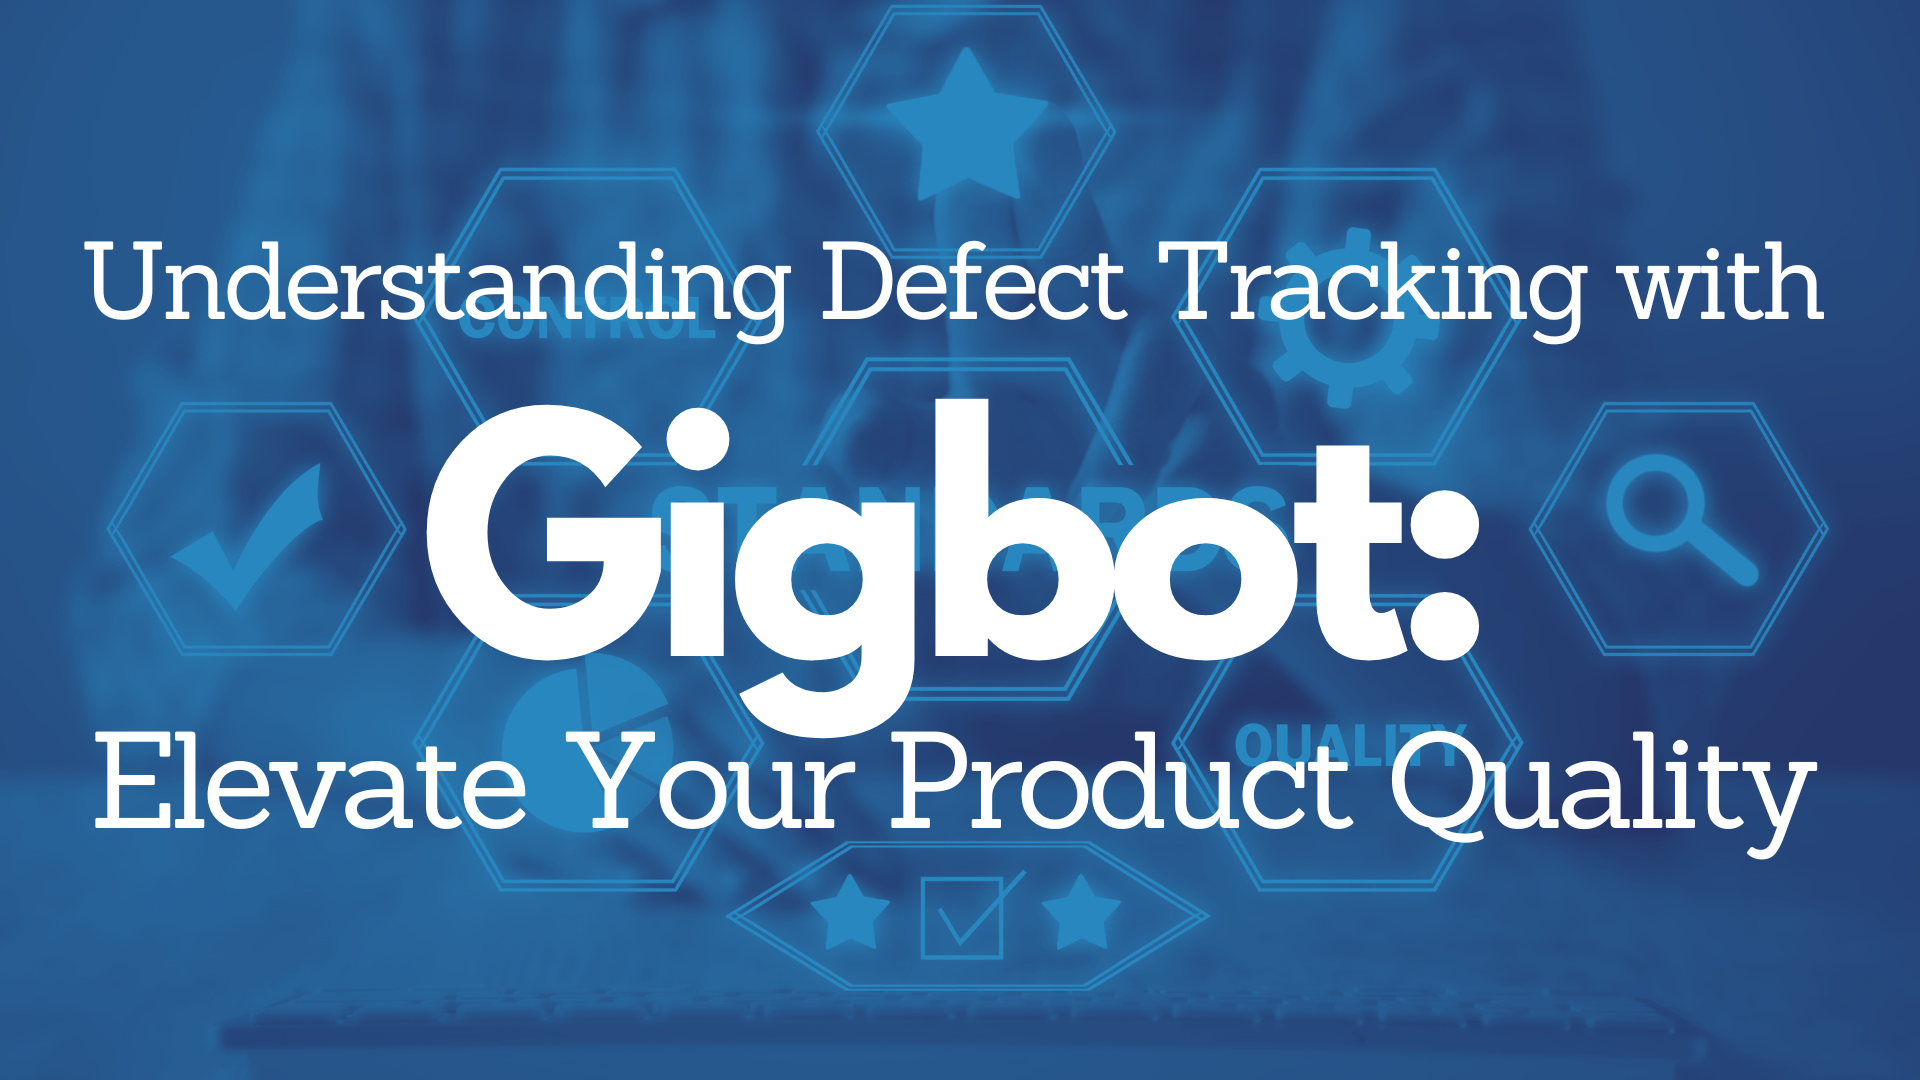 Understanding Defect Tracking with Gigbot